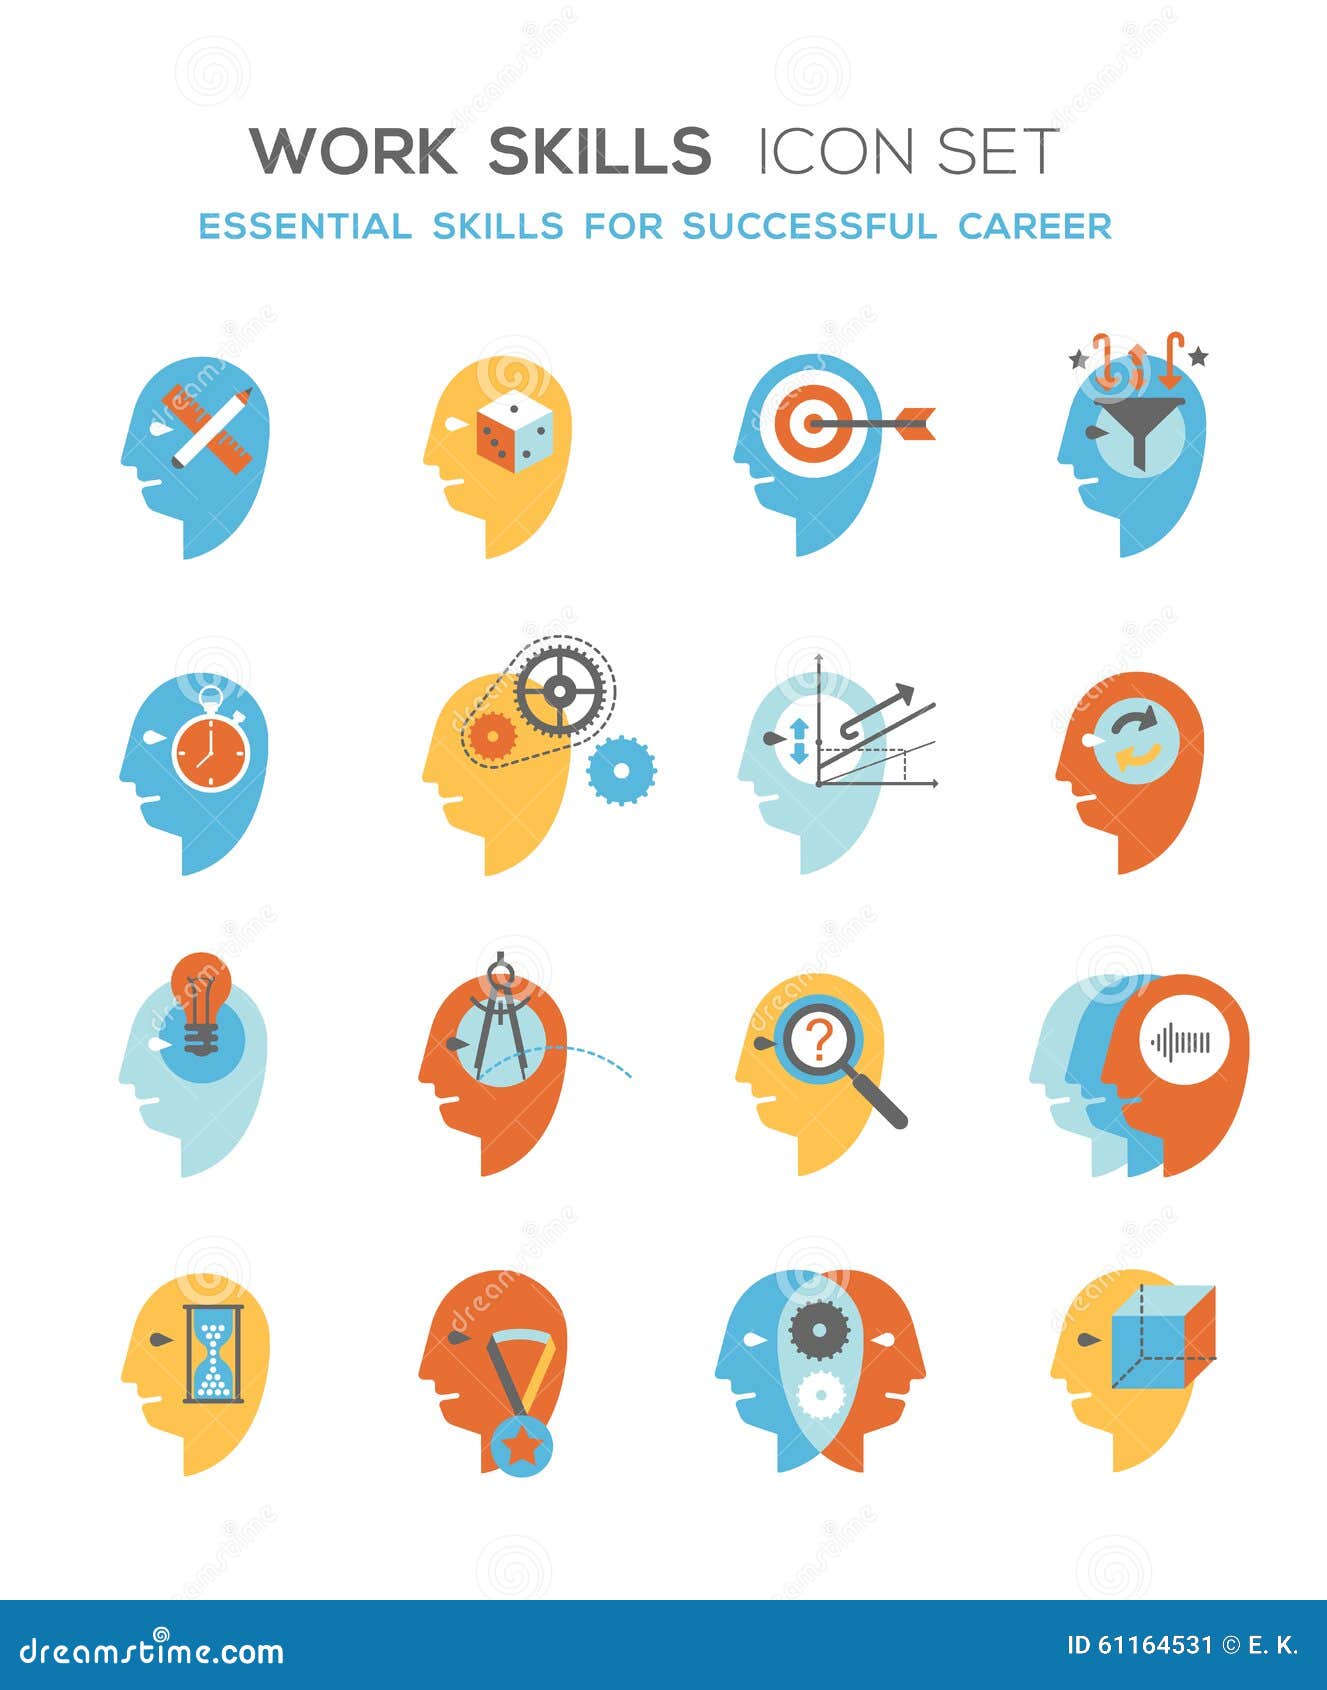 work-skills-icon-set-line-icons-representing-abstract-symbols-personal-essential-successful-education-career-personal-61164531.jpg